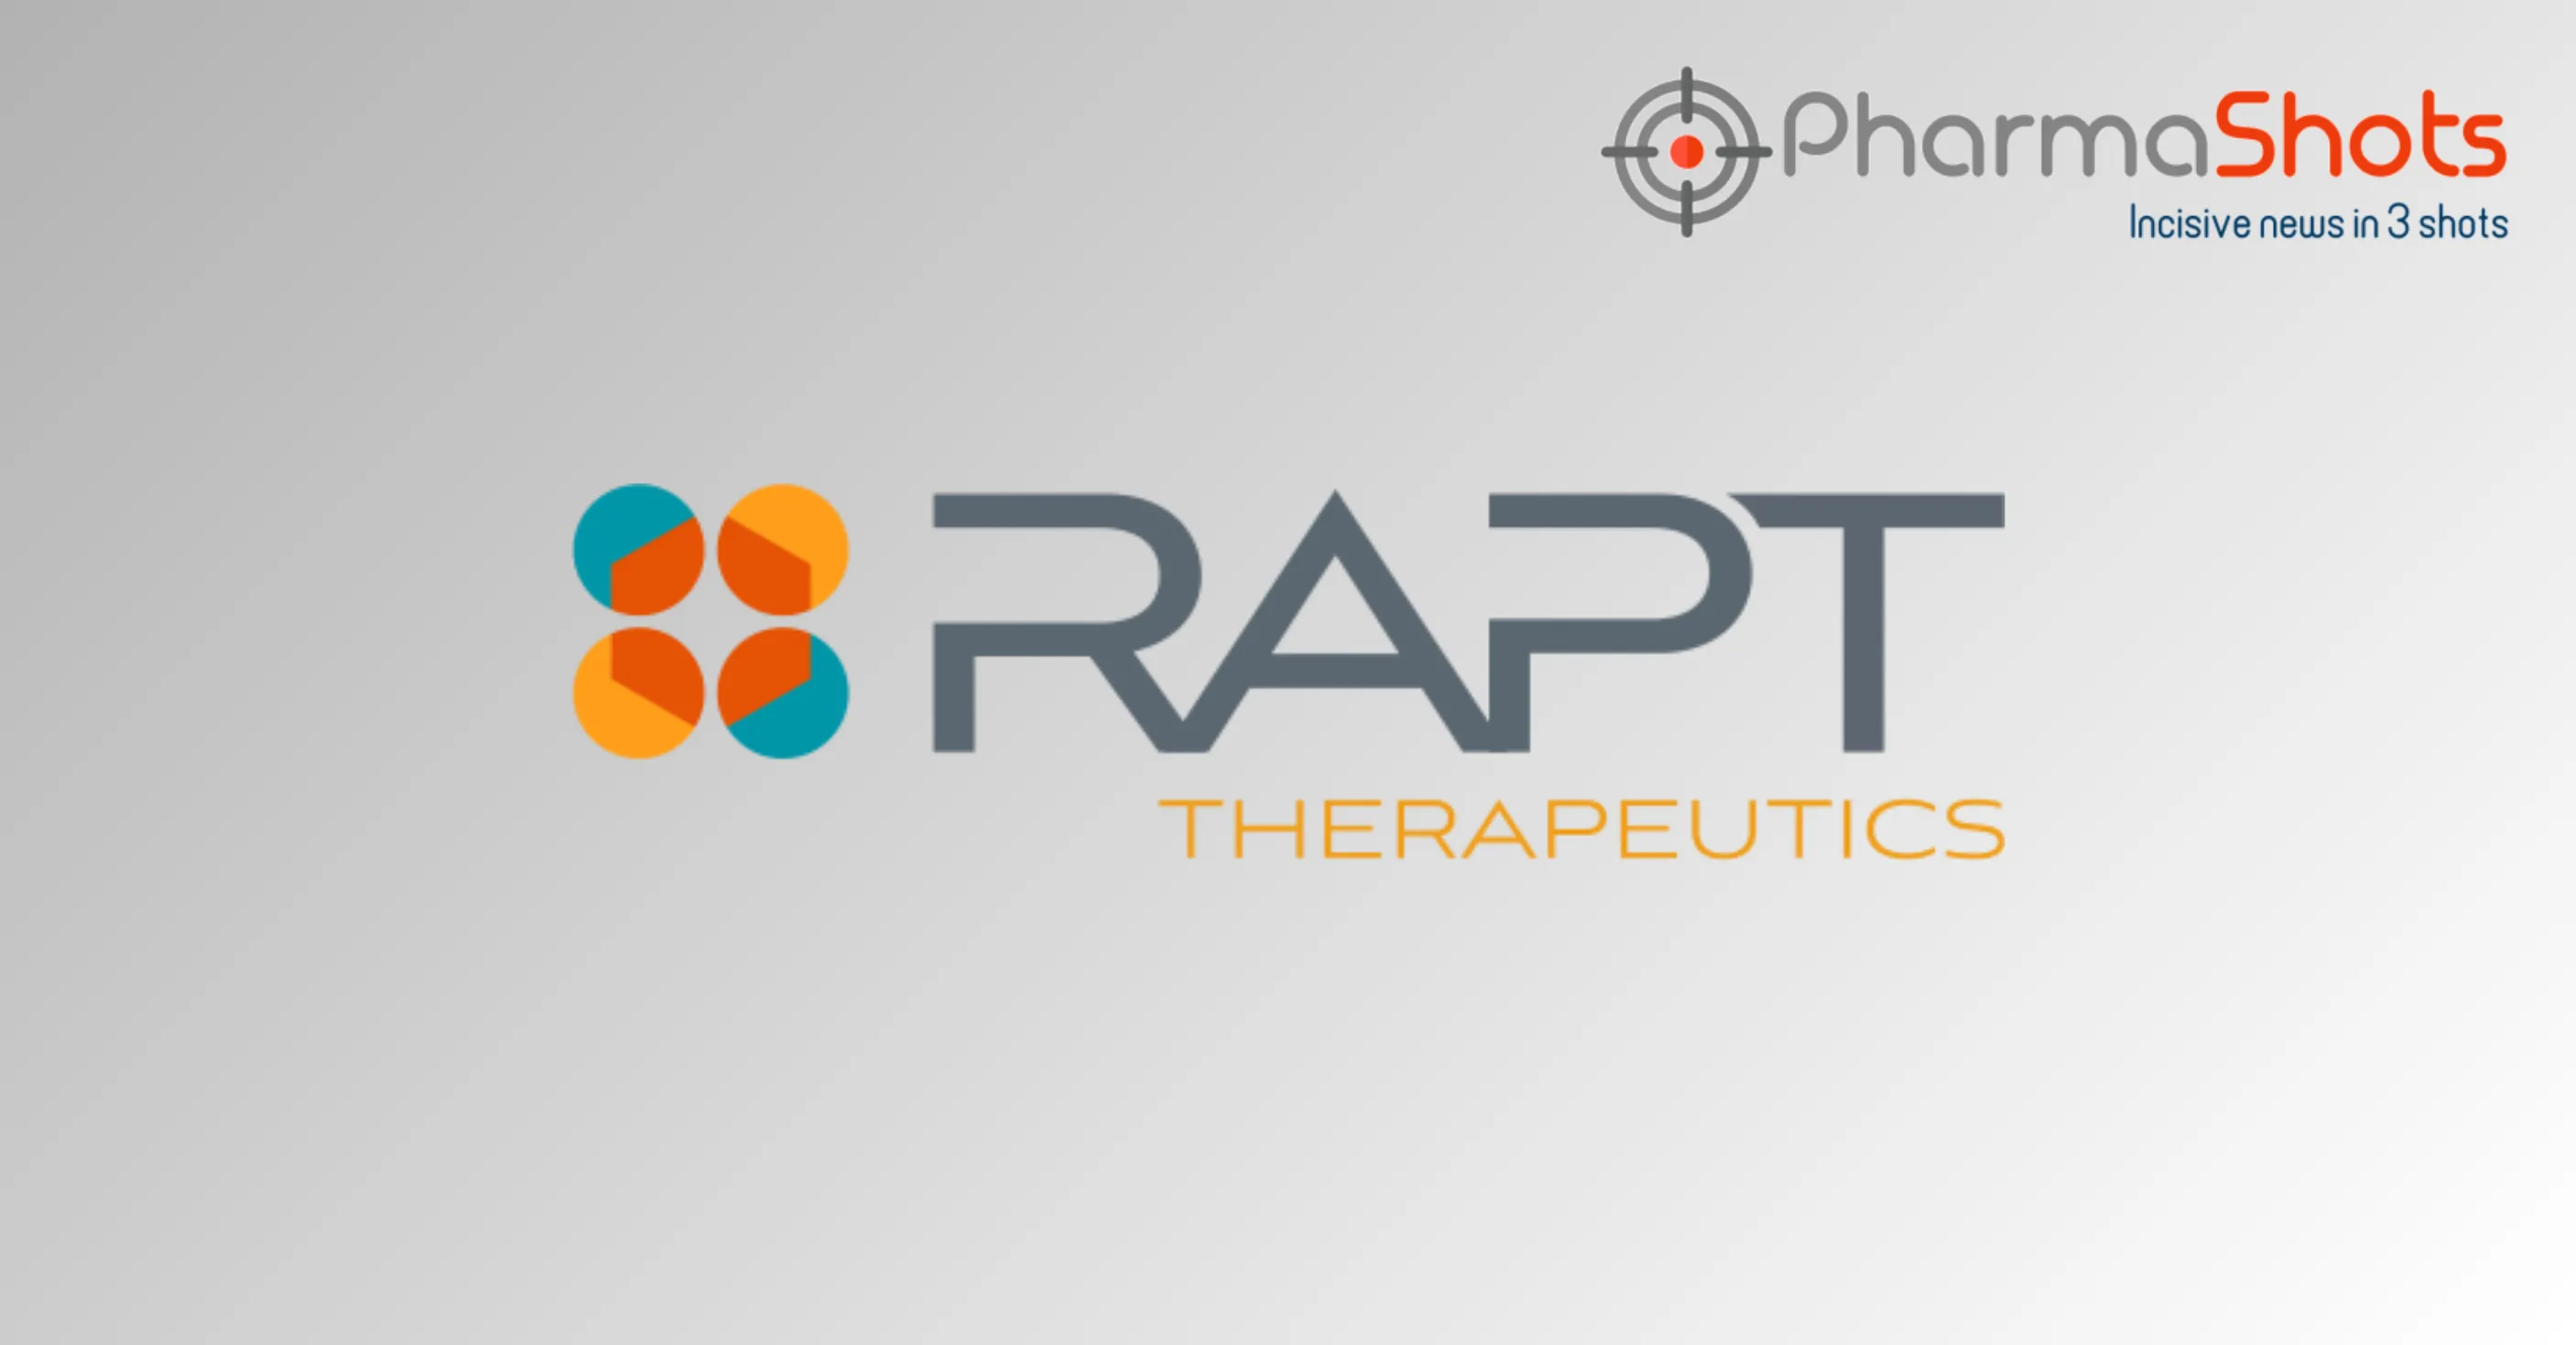 The US FDA Places Clinical Hold on the Trials Assessing RAPT Therapeutics’ Zelnecirnon